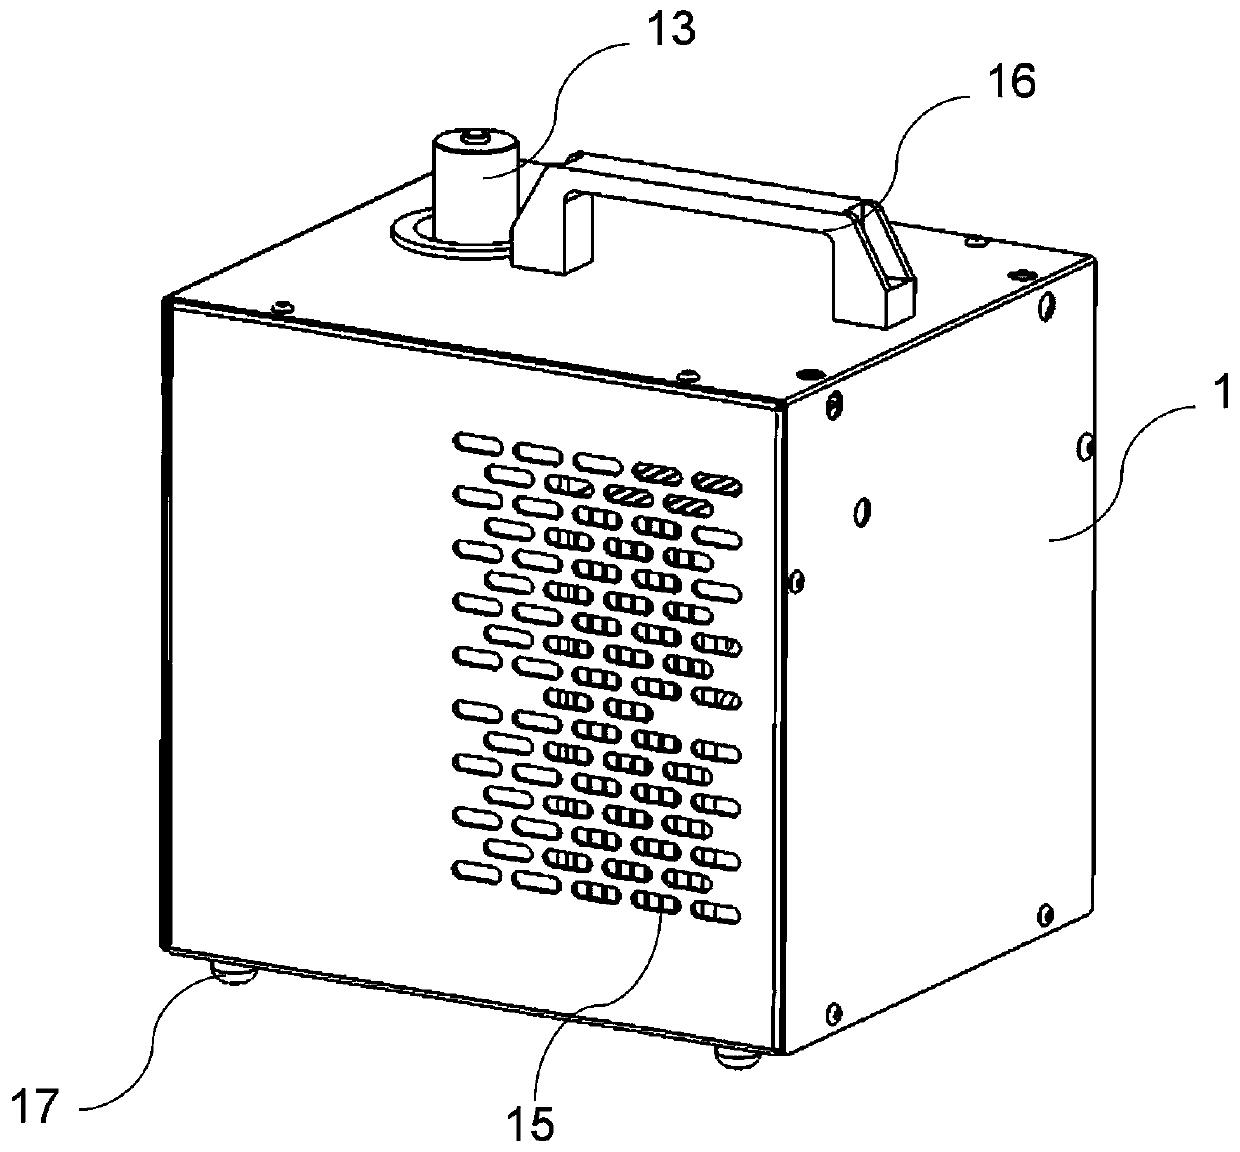 Hydrogen-oxygen mixed gas generating device